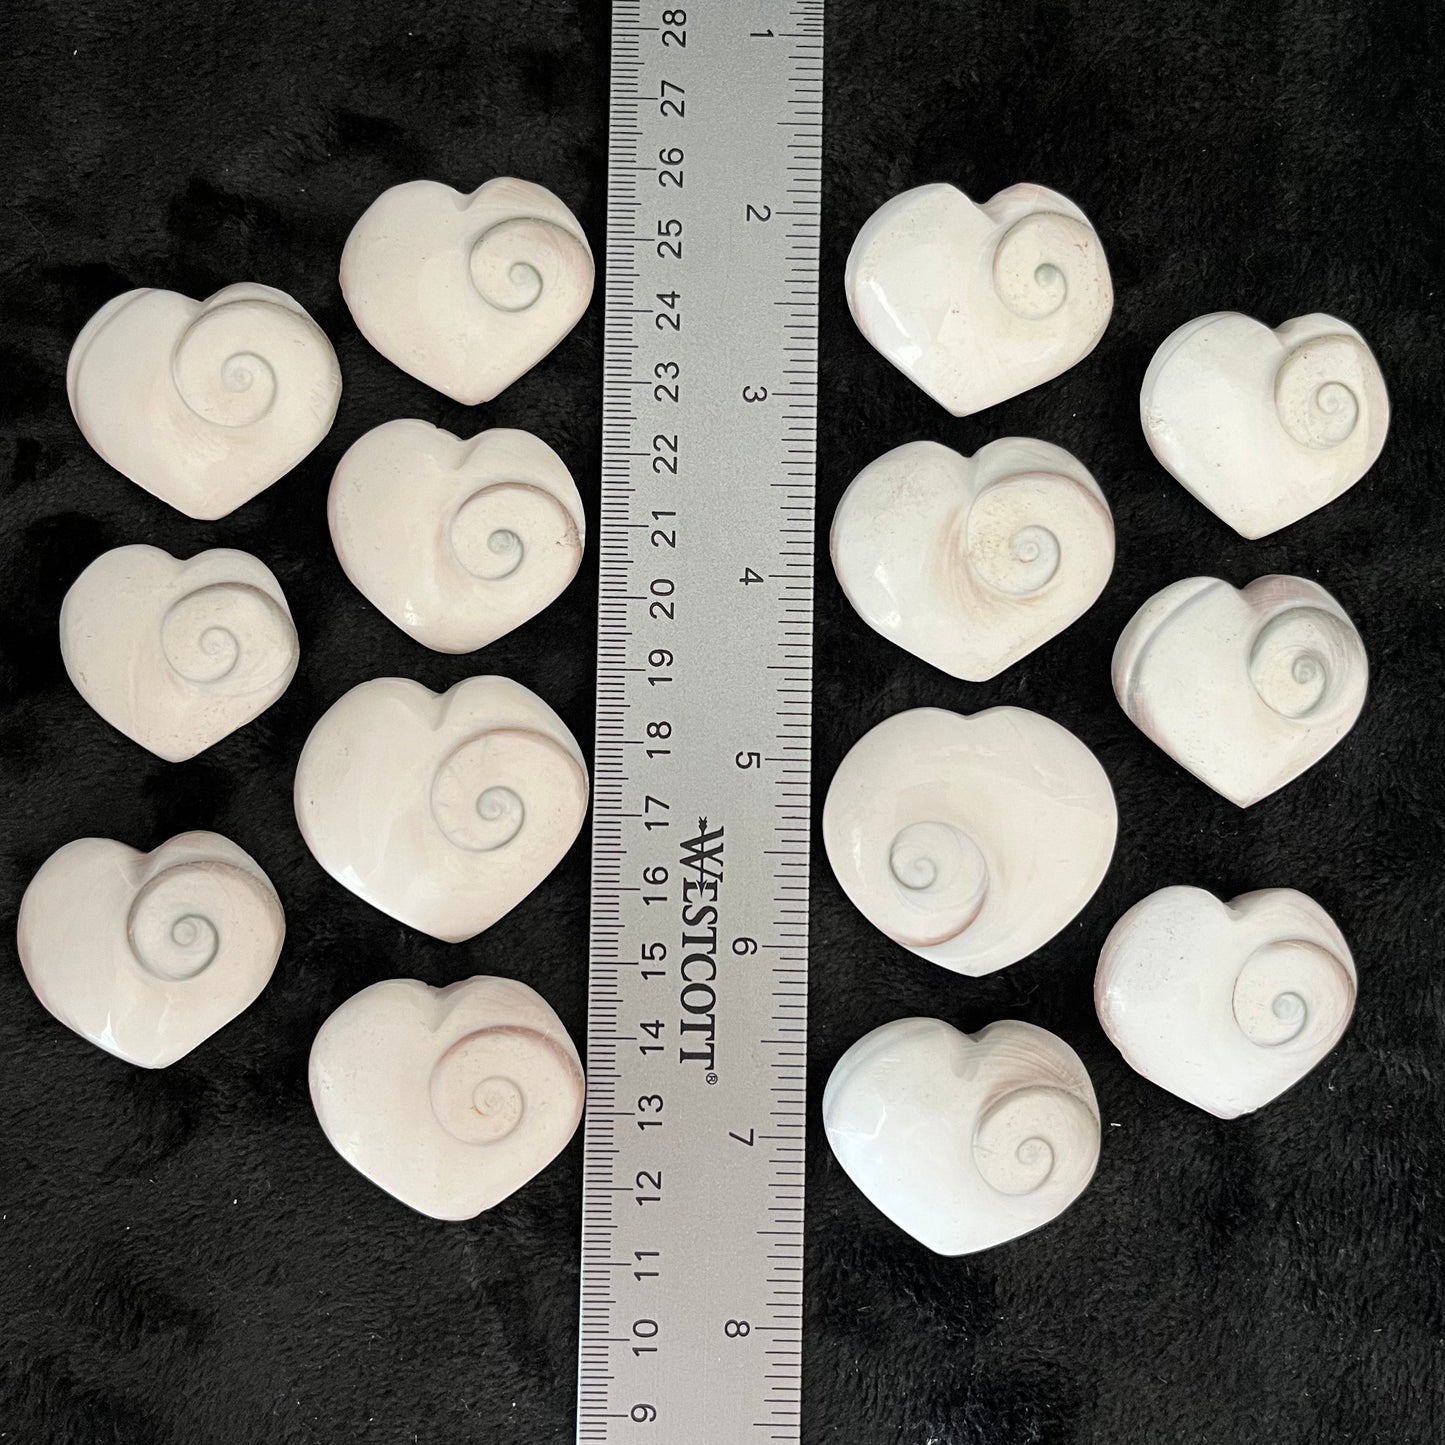 St Lucia Shell Heart, 1 Pound, WH-0010